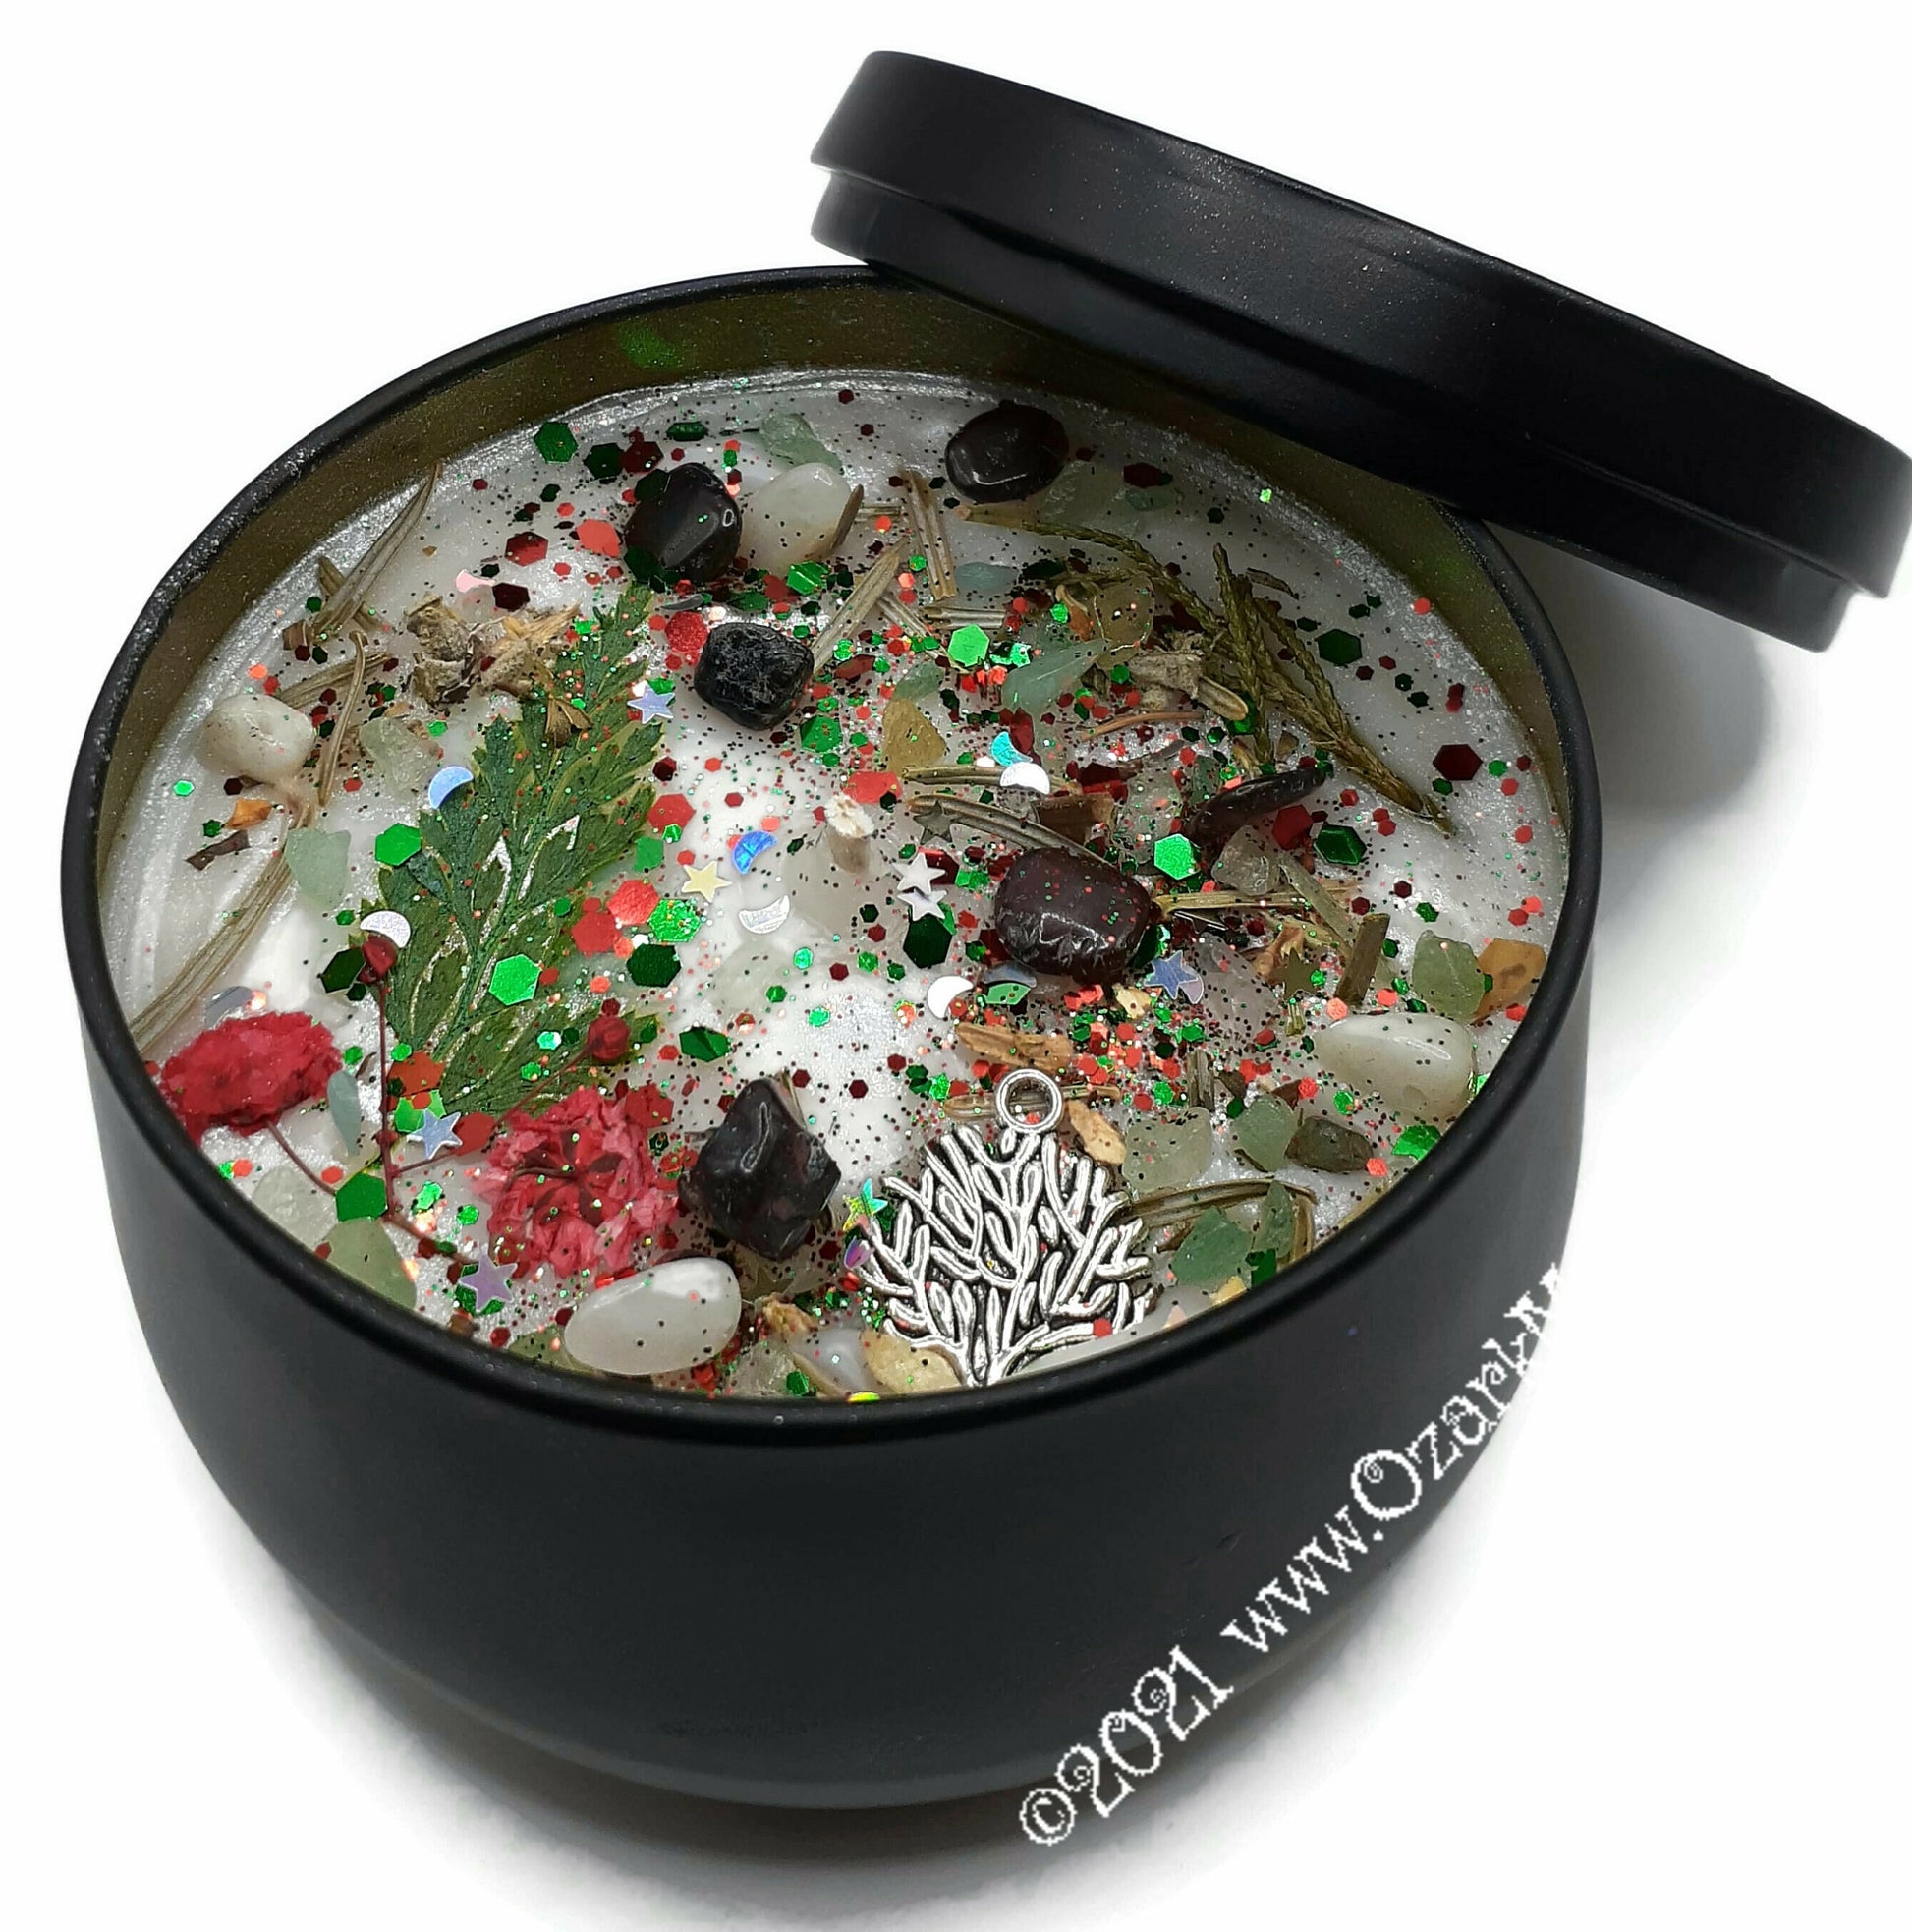 YULE Sabbat Candle or Soy Wax Melts with Aventurine and Garnet Crystals and Pine Needles - Tin or Tarts Highly Scented - Pagan Wiccan Wicca